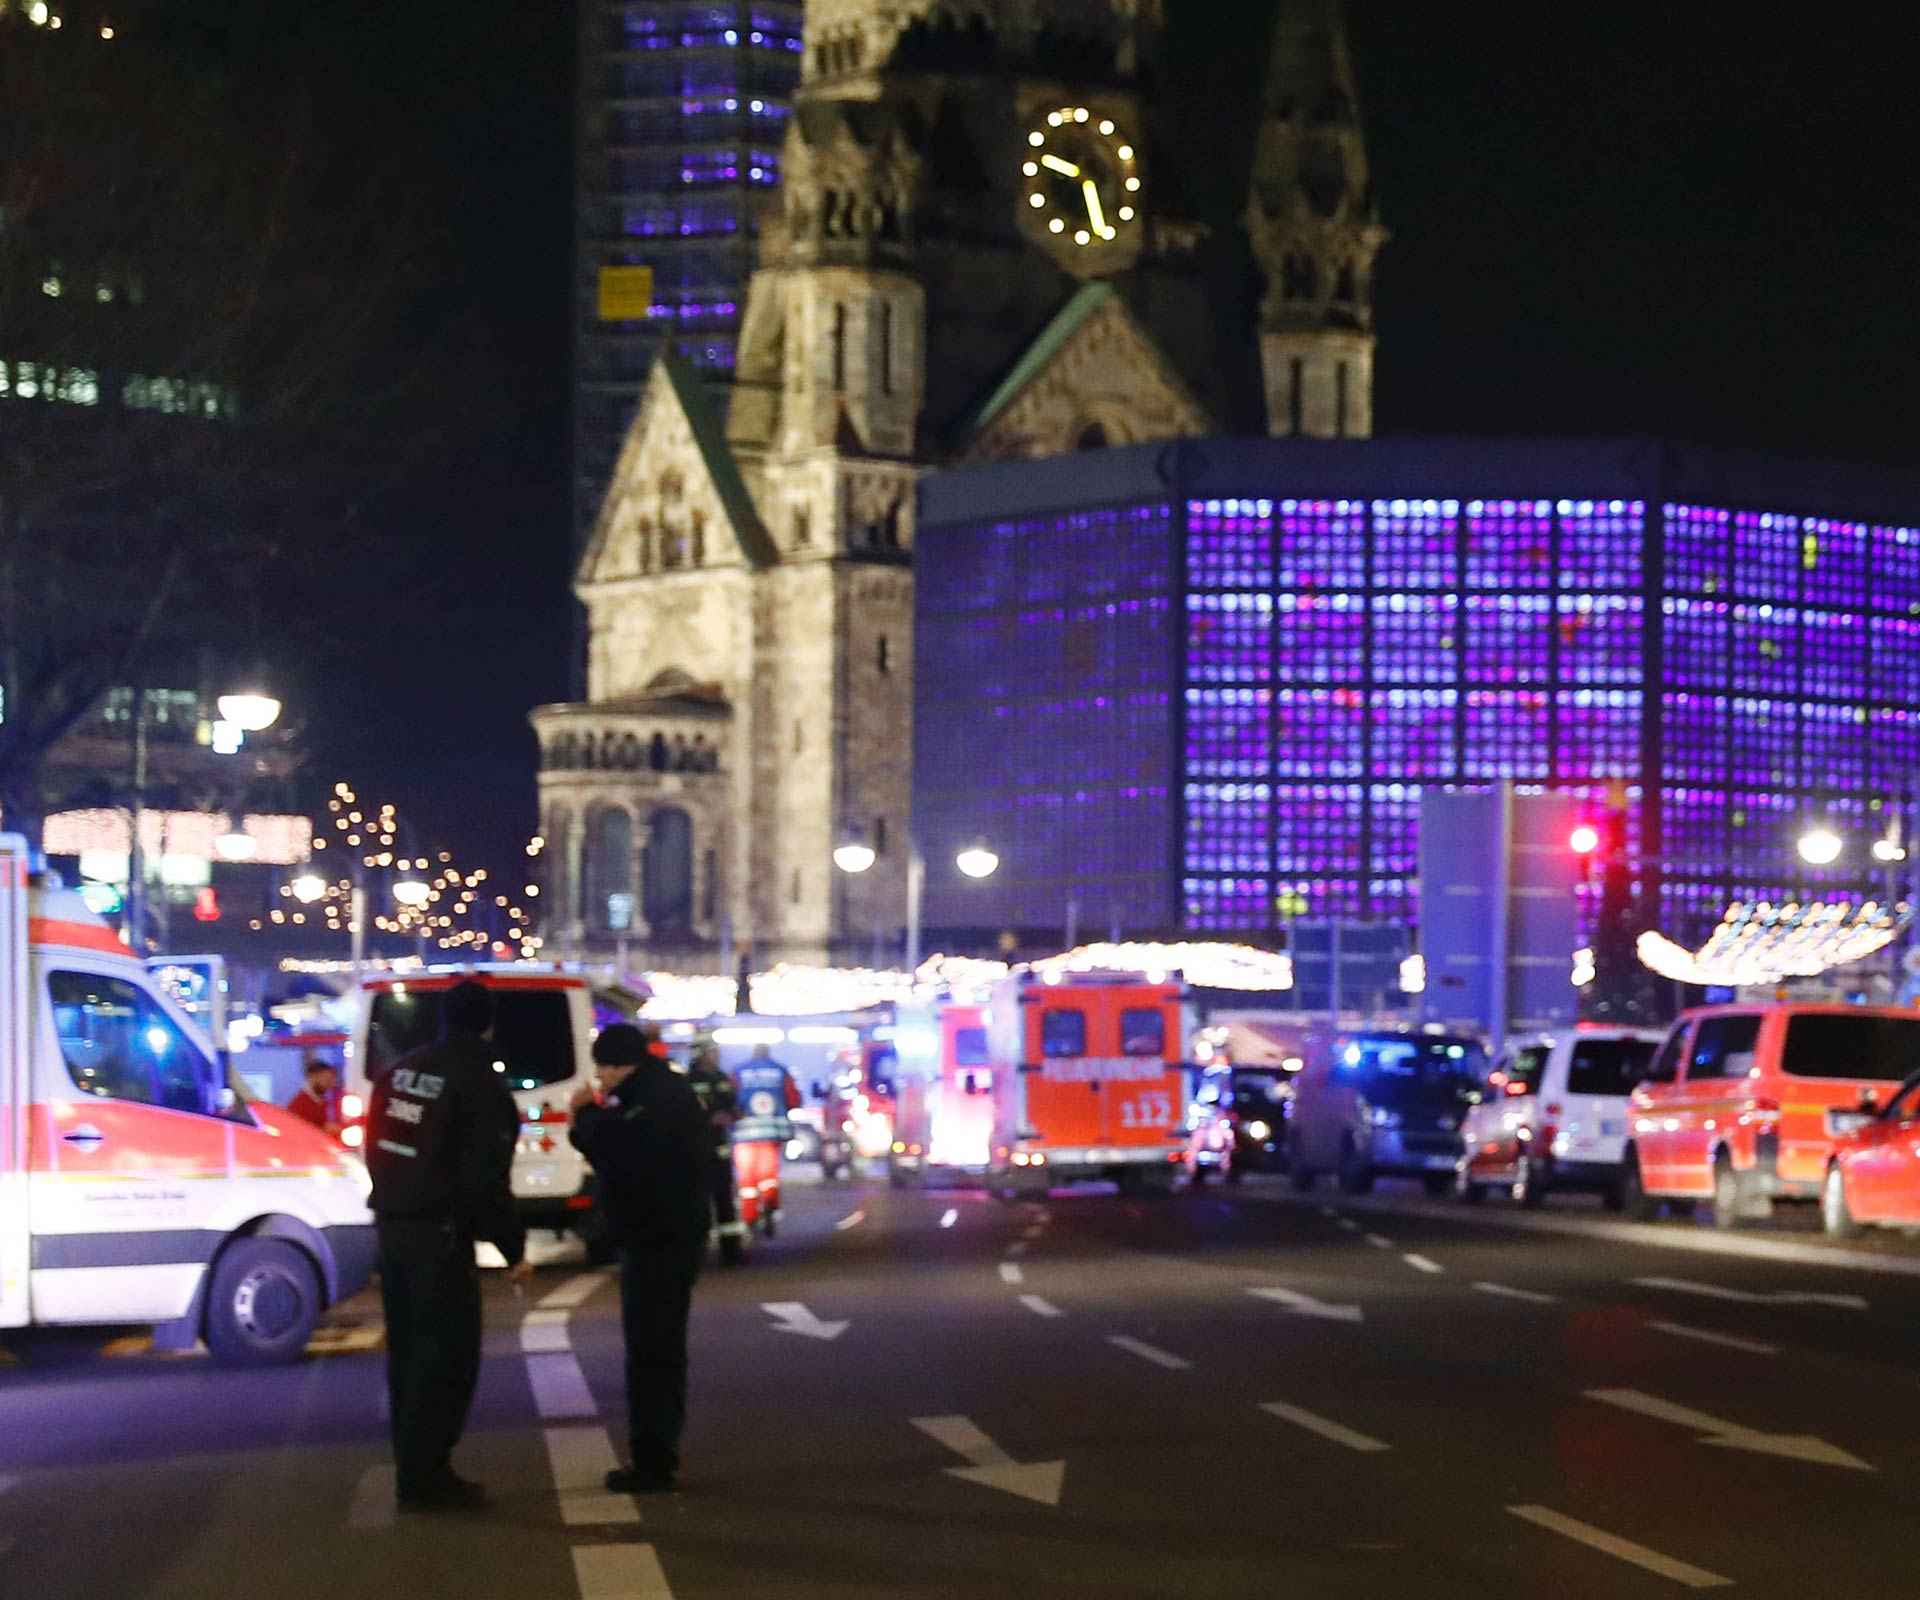 ISIS claims responsibility for terrorist attack in Germany